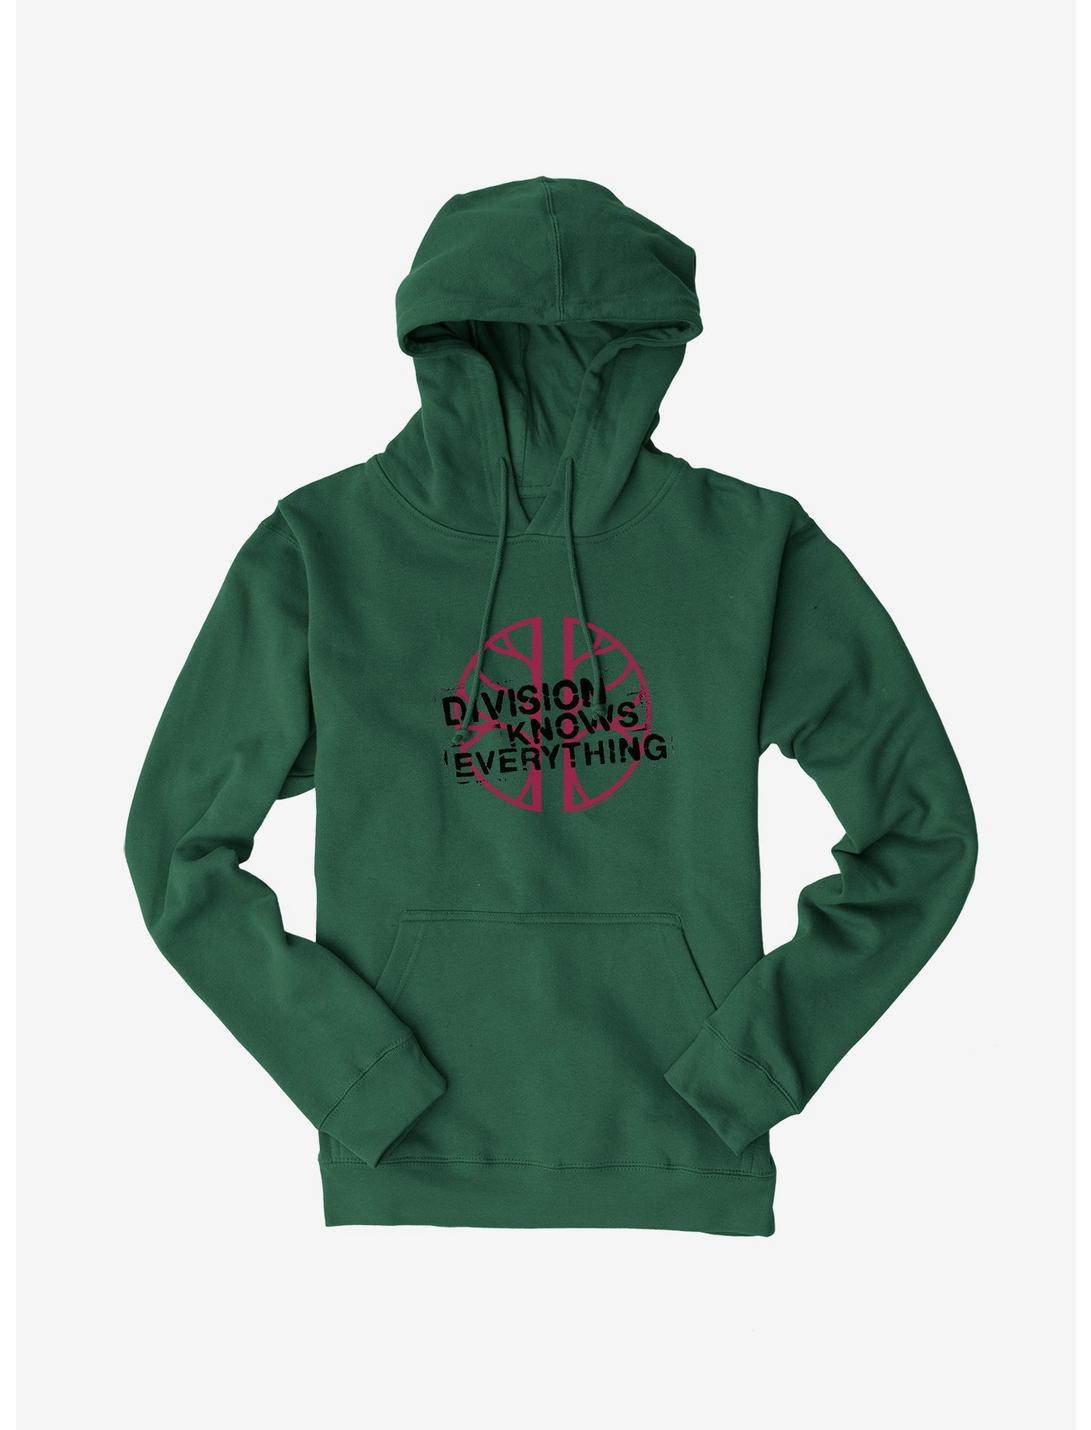 Doctor Who Division Knows Everything Hoodie, , hi-res